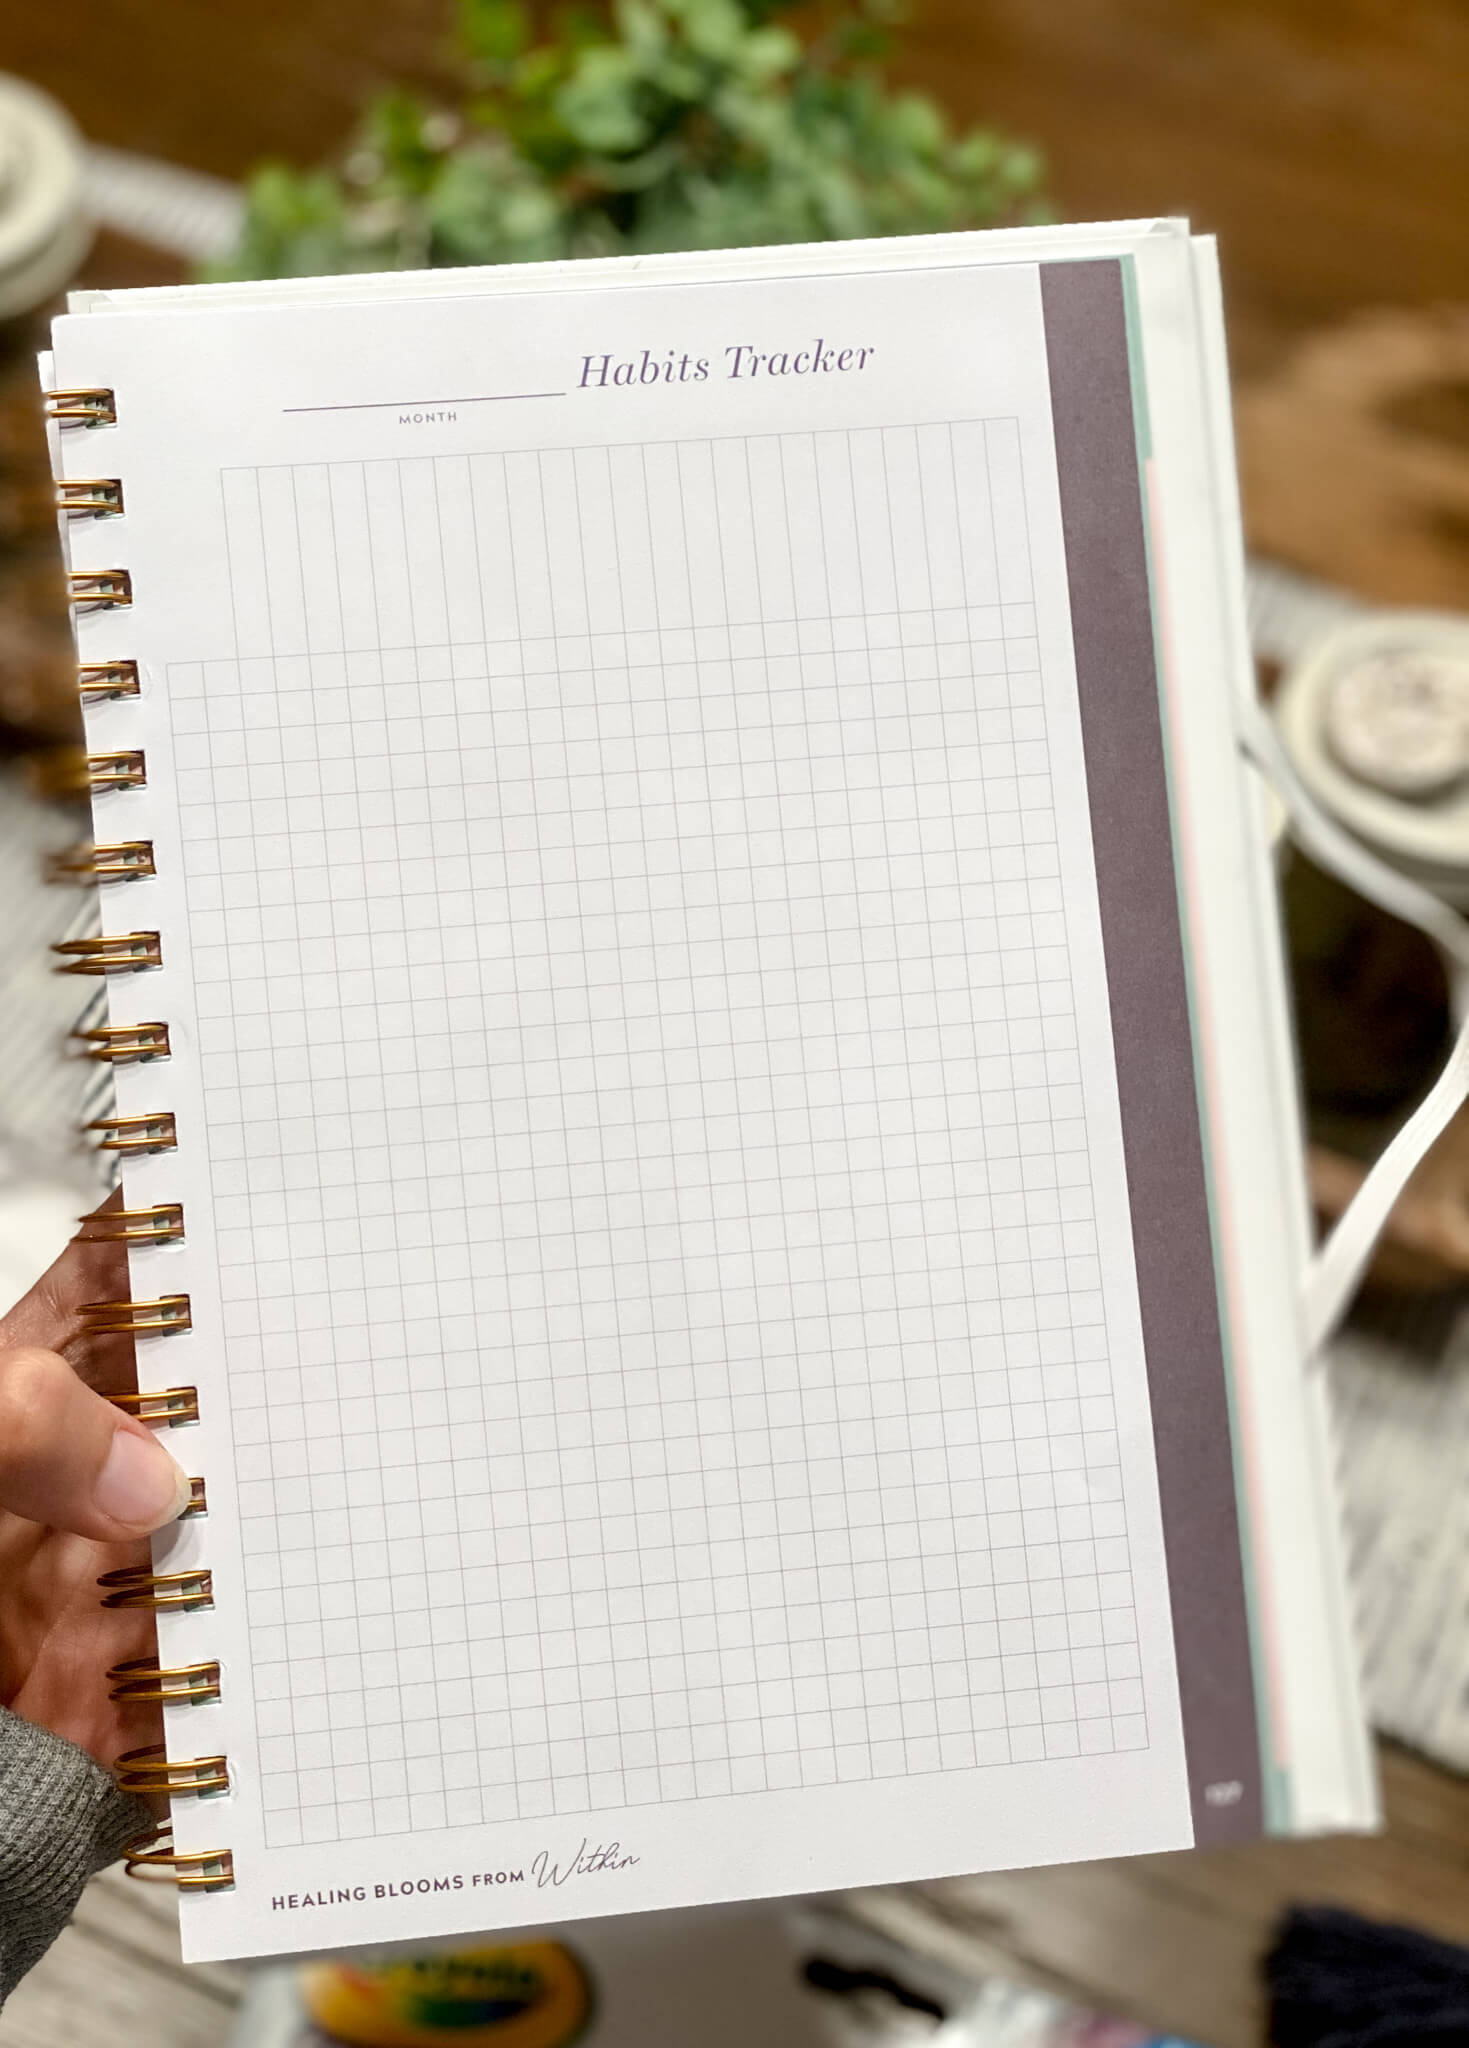 34 gut health and healing habits to track in your bullet journal agutsygirl.com #guthealing #foodjournal #eliminationdiet #healthlog 90-day journal